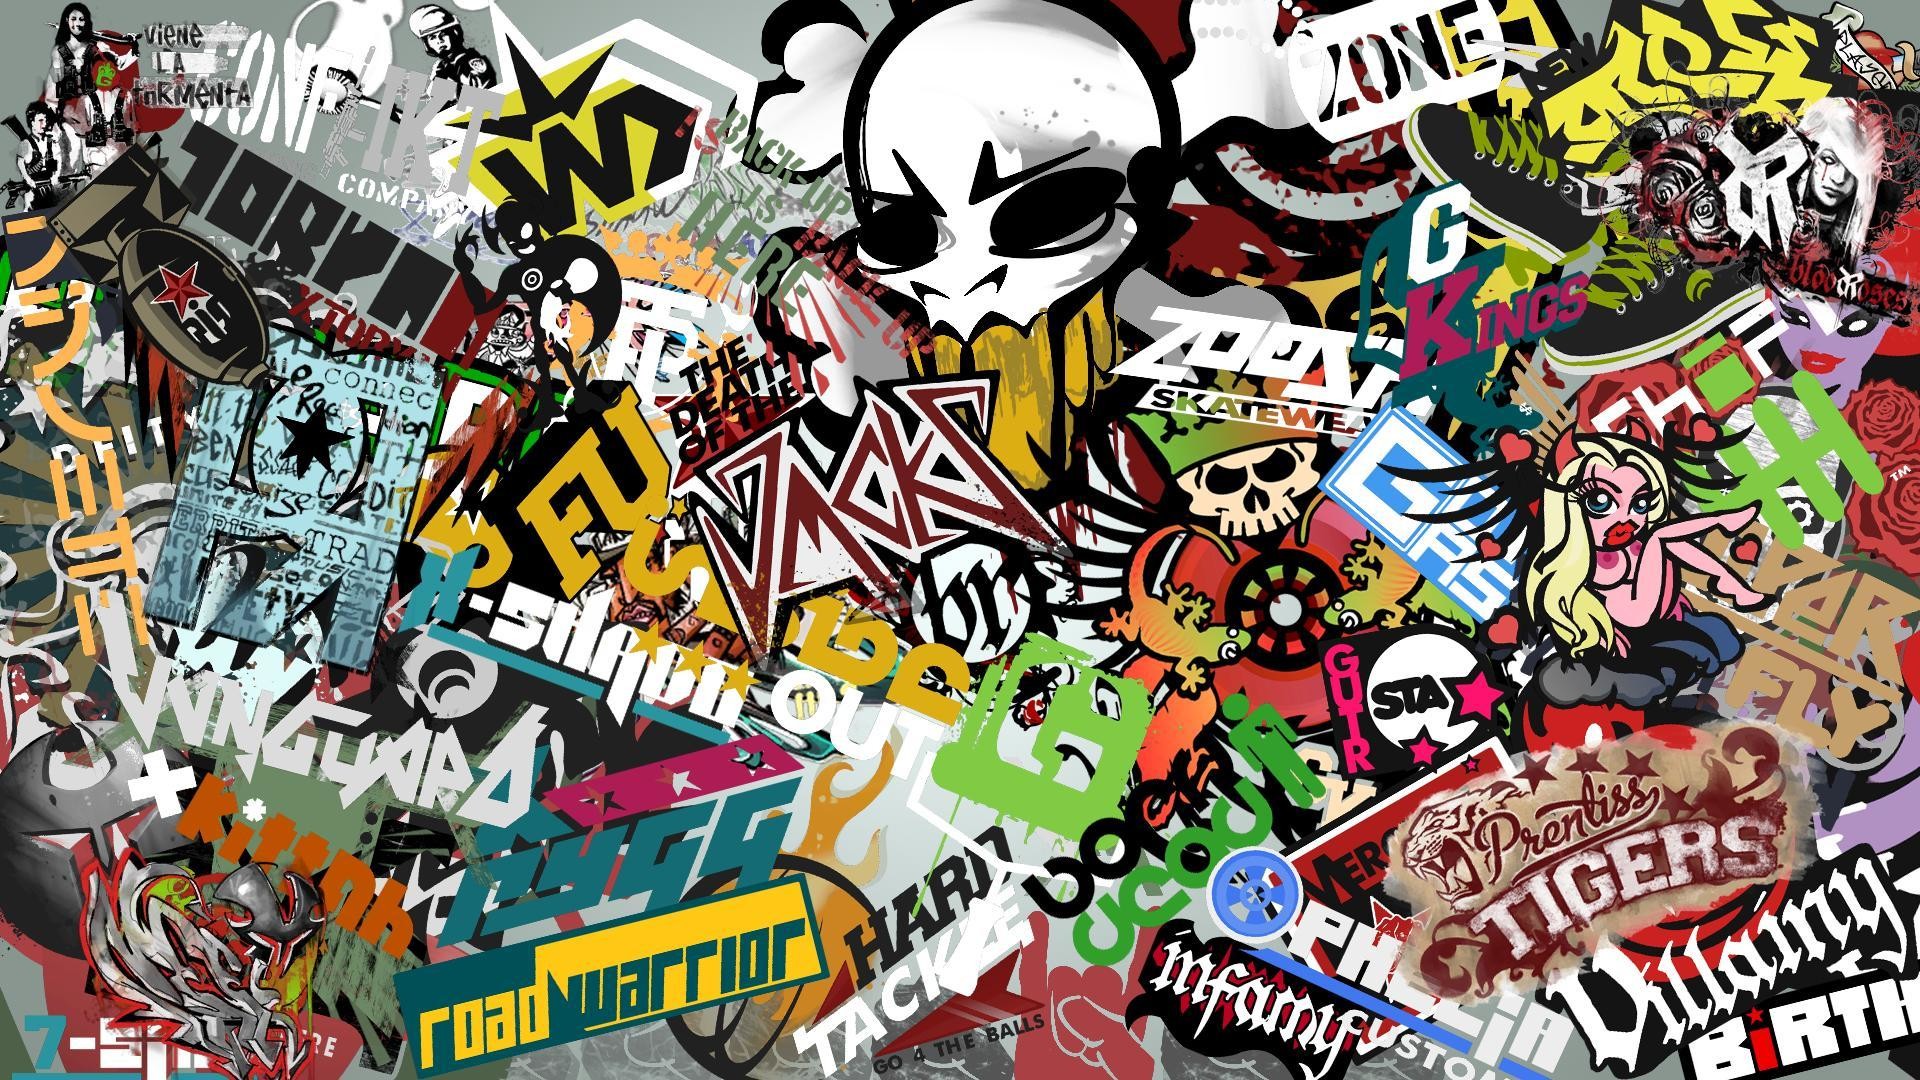 1920x1080 ... Great Sticker Bomb Wallpaper HD Wallpapers of Nature- Full HD 1080p  Desktop Backgrounds for PC